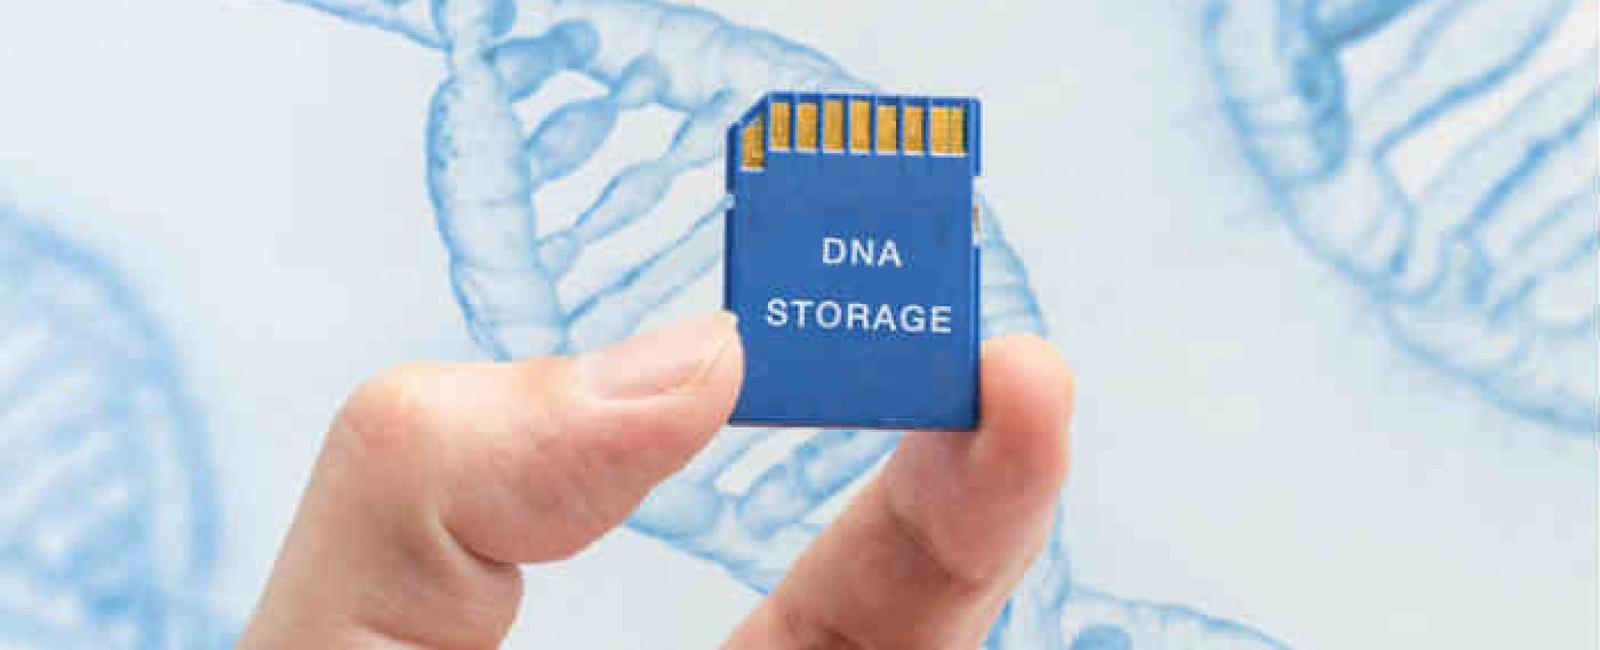 Entire data of the world can be stored in 4 grams of dna